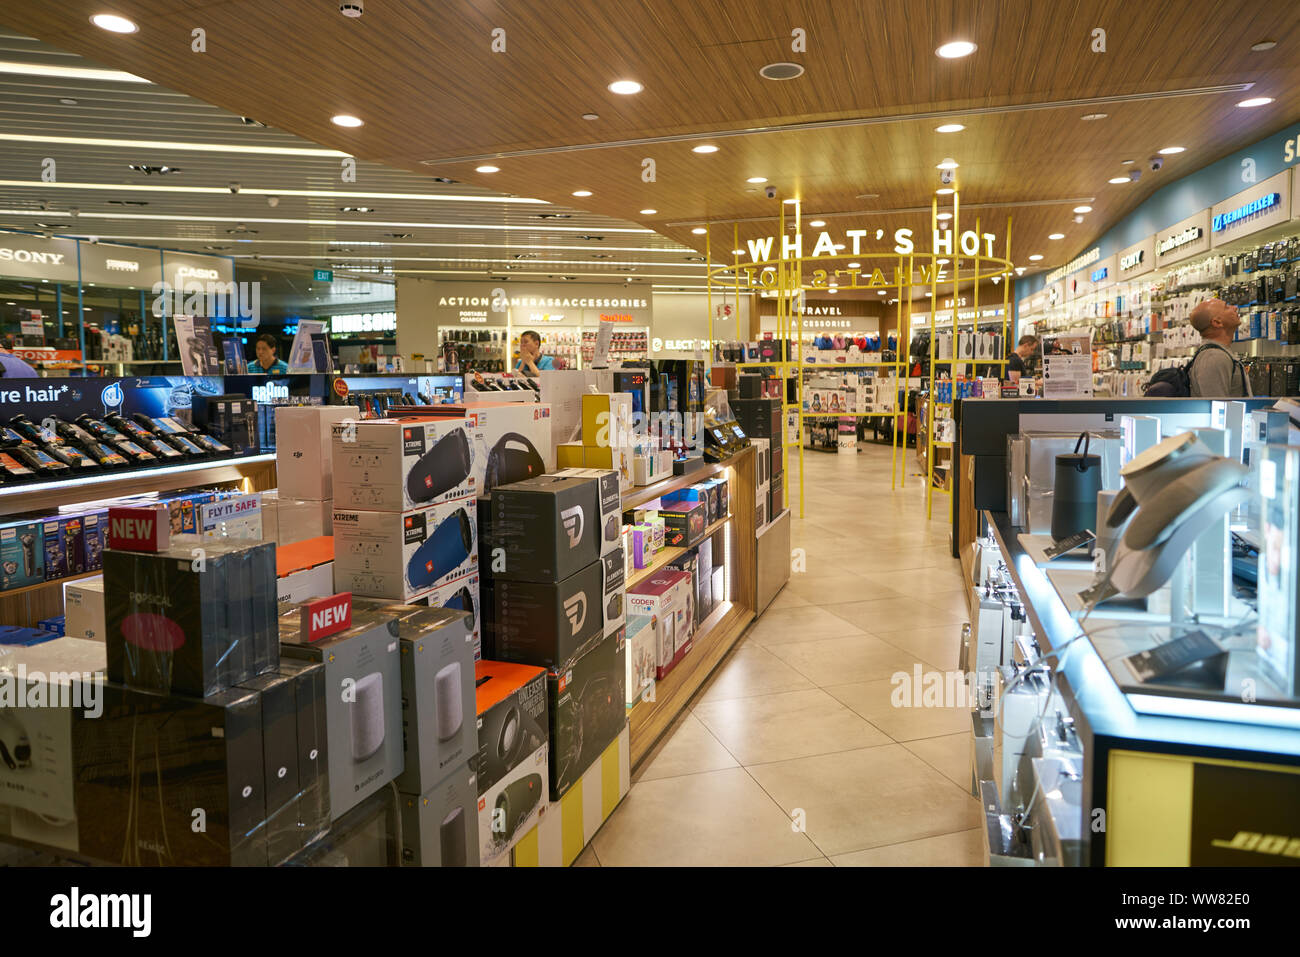 SINGAPORE - CIRCA APRIL, 2019: goods on display at an electronics store in Singapore Changi Airport. Stock Photo